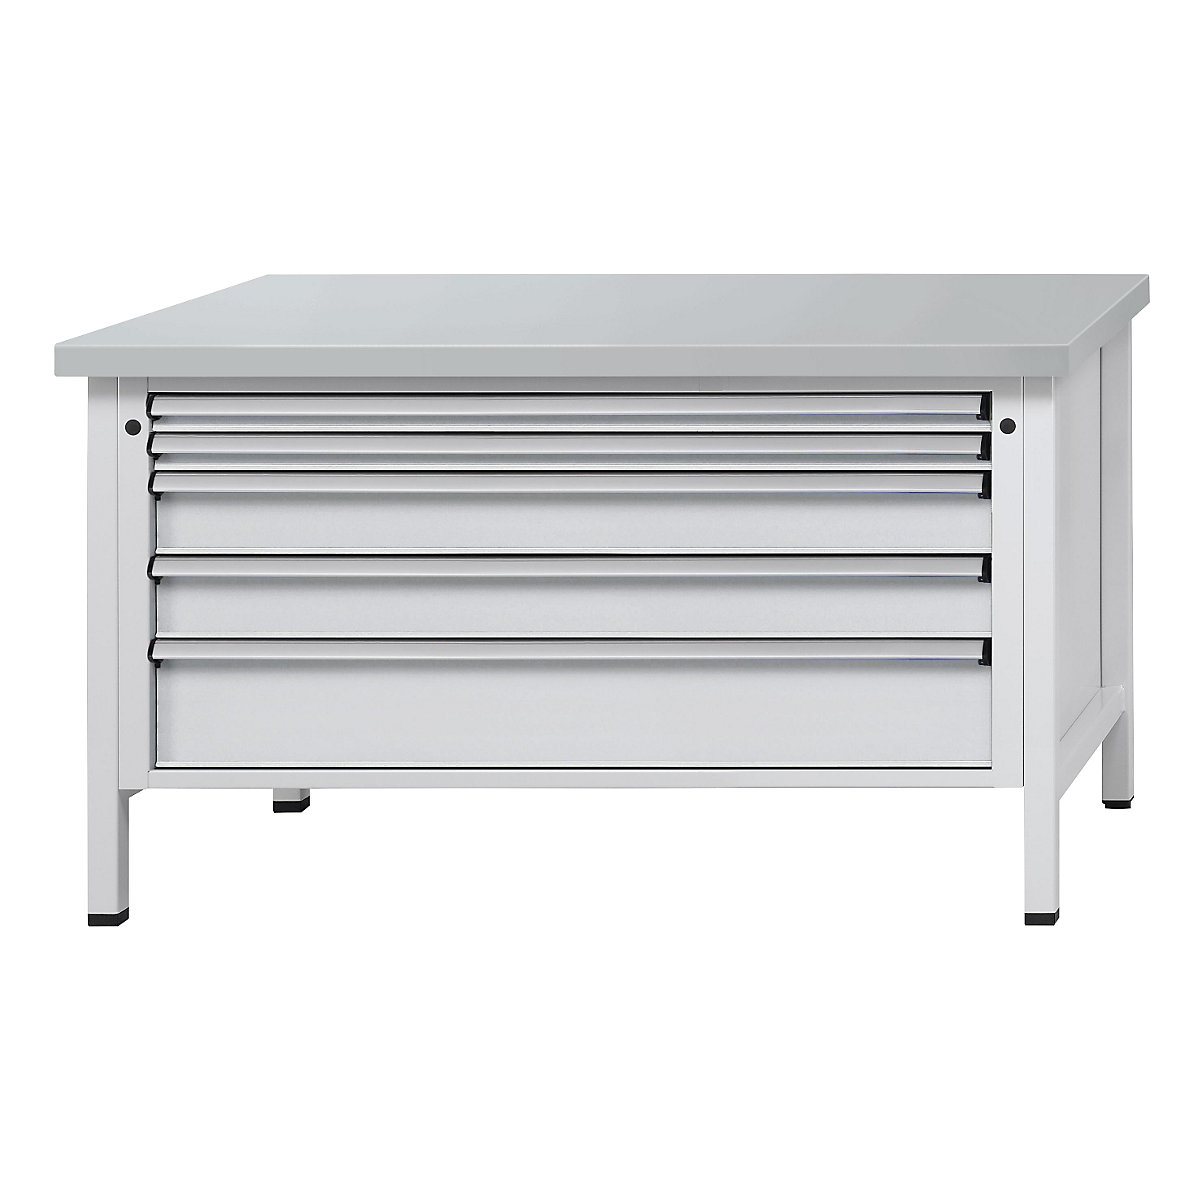 Workbench with XL/XXL drawers, frame construction – ANKE, width 1500 mm, 5 drawers, sheet steel covered worktop, front in light grey-11